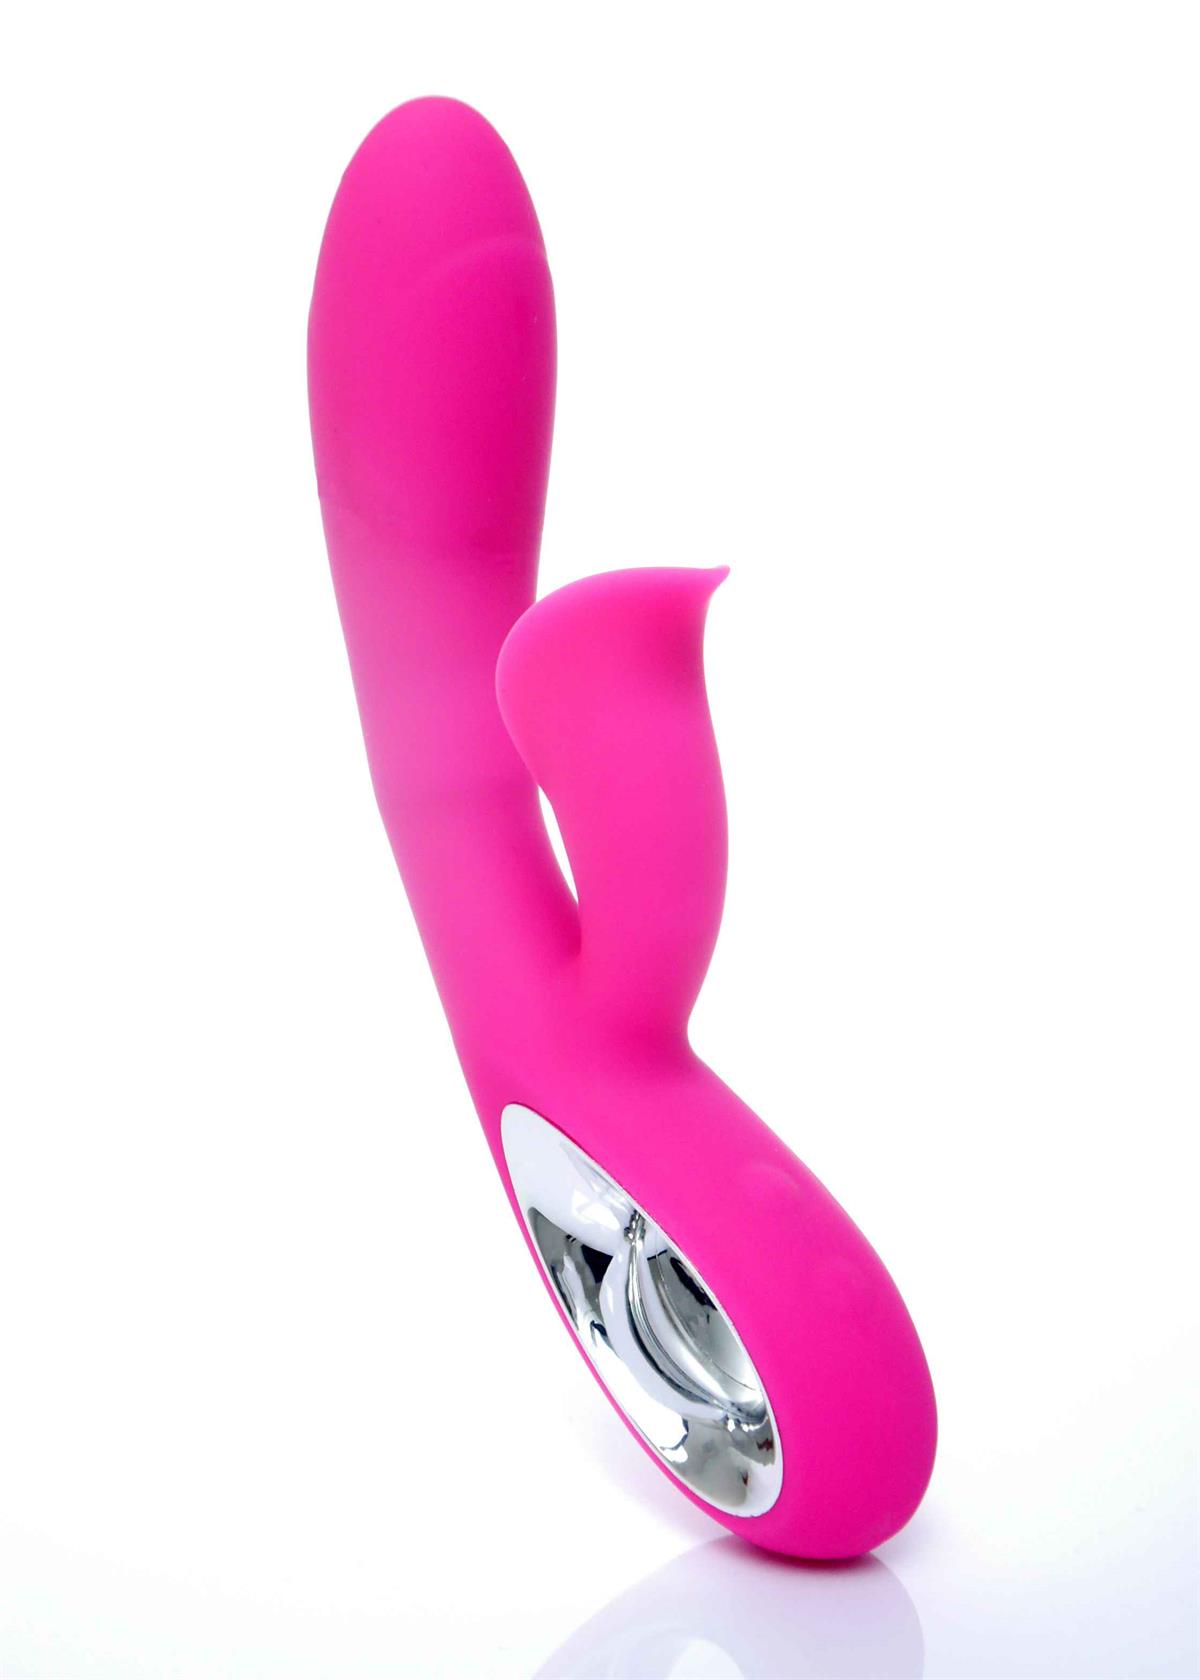 Bossoftoys - 26-00066  - Daro g spot vibrator - Silicone - pink colour - total length 19,5 cm -  dia 2 /3 cm - 12 function - Rechargeable